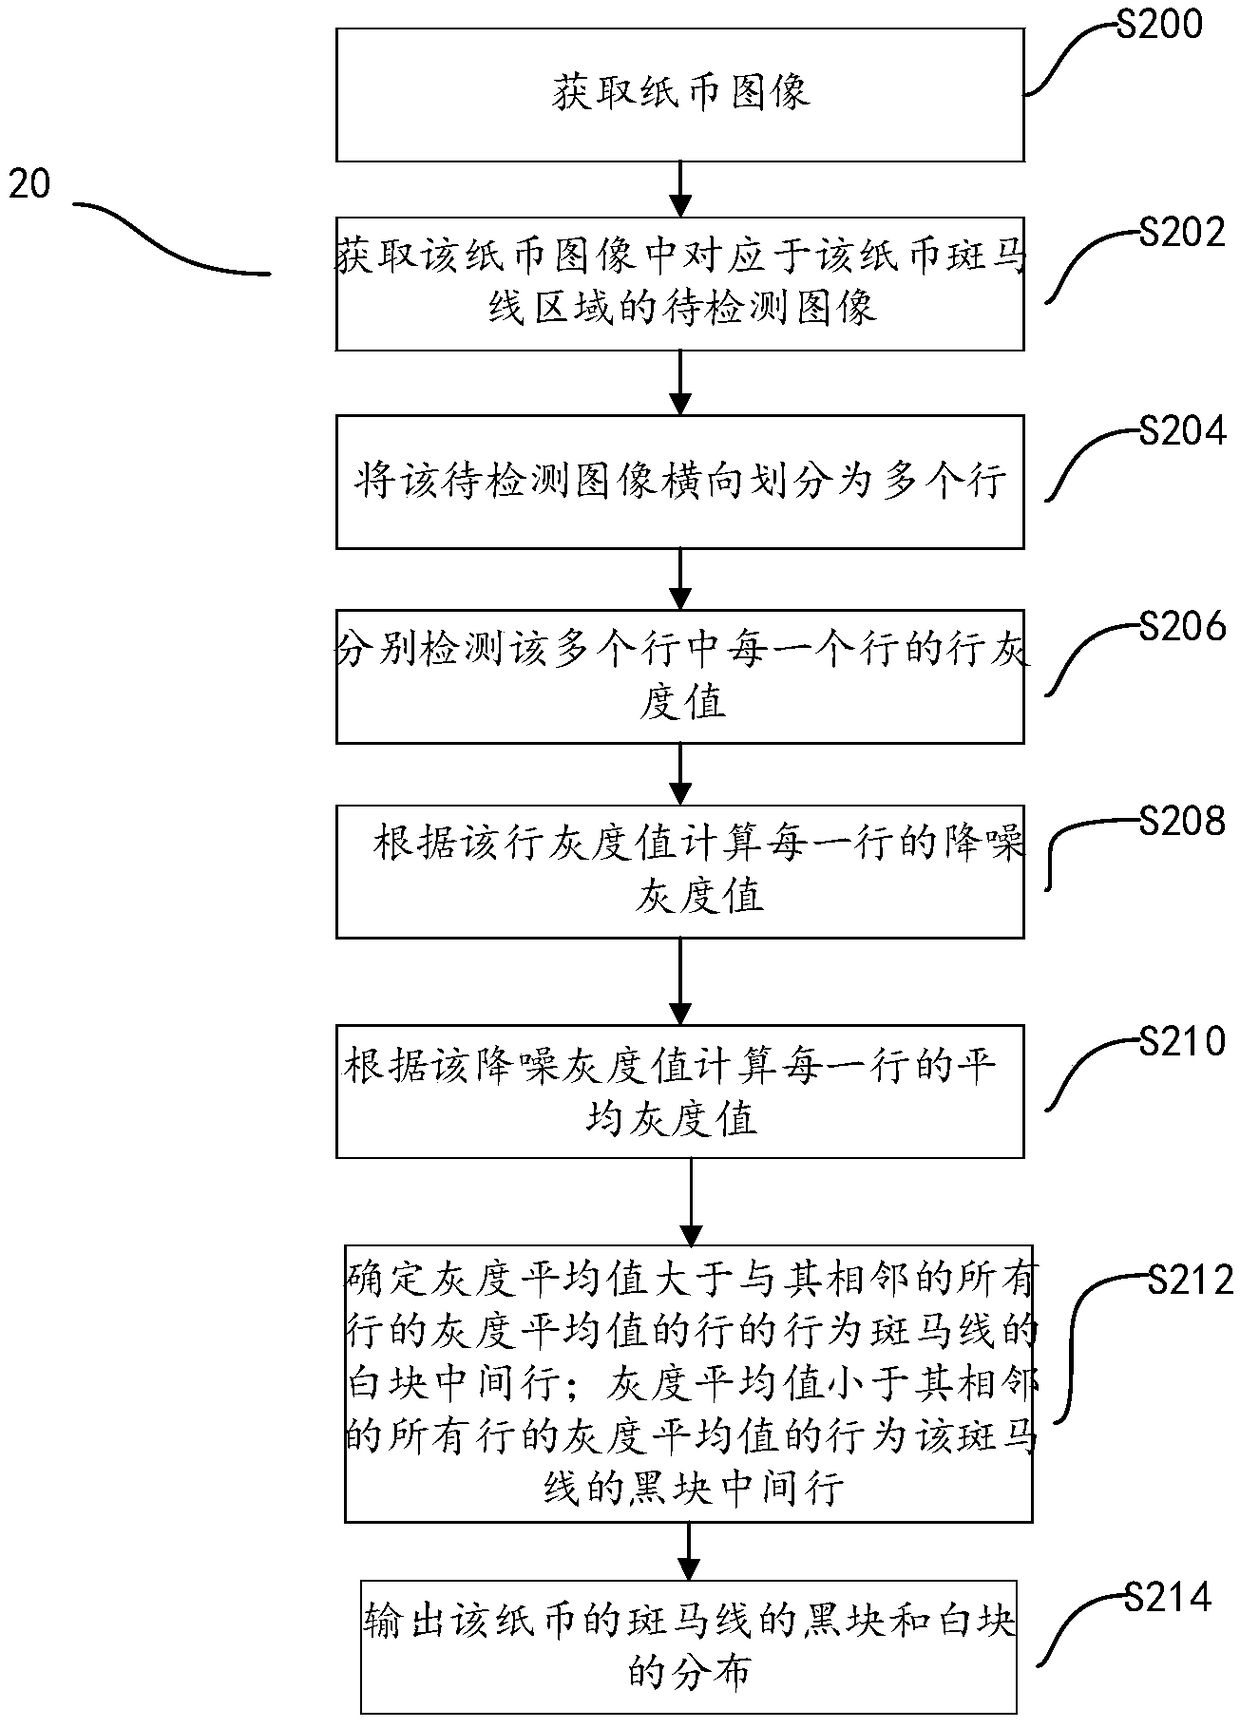 Recognition method and device for banknote zebra crossing black and white blocks